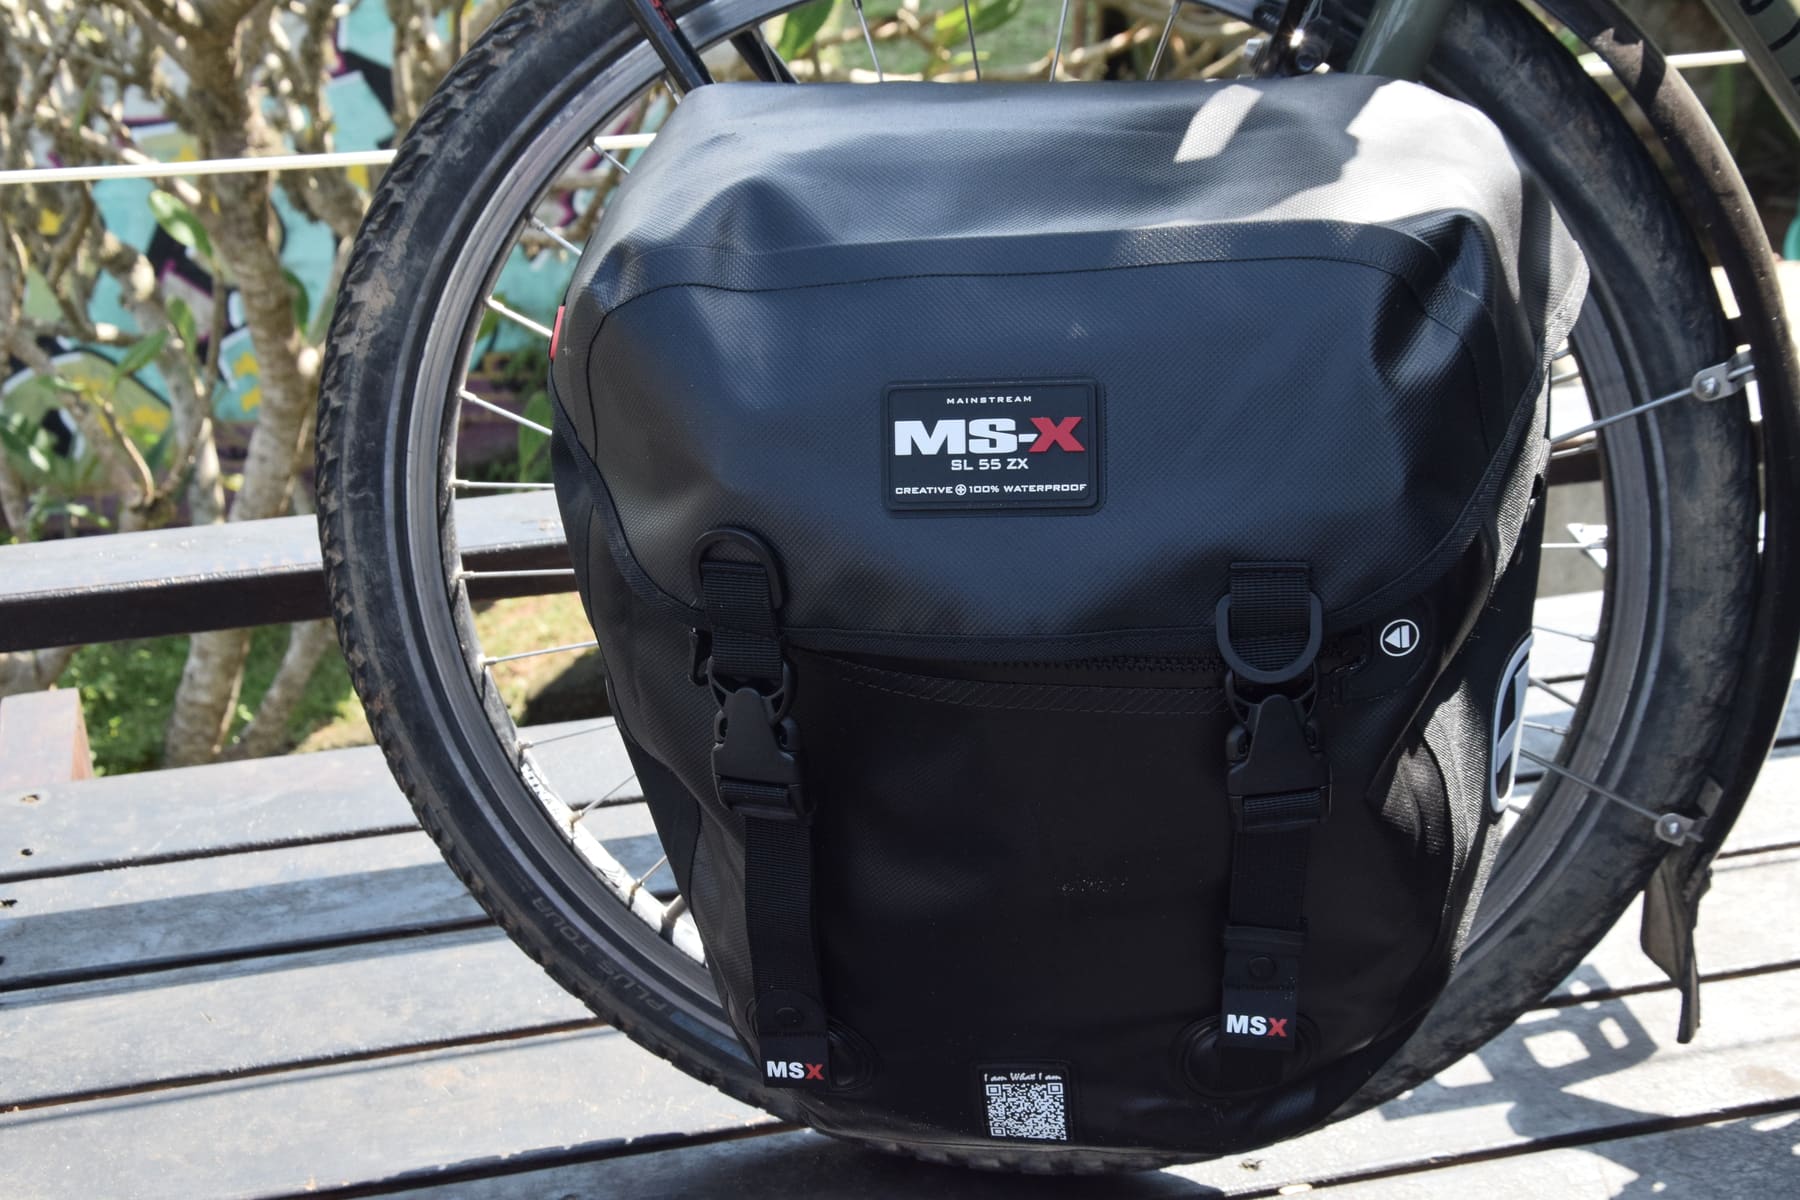 MSX SL 55 ZX luggage carrier bags